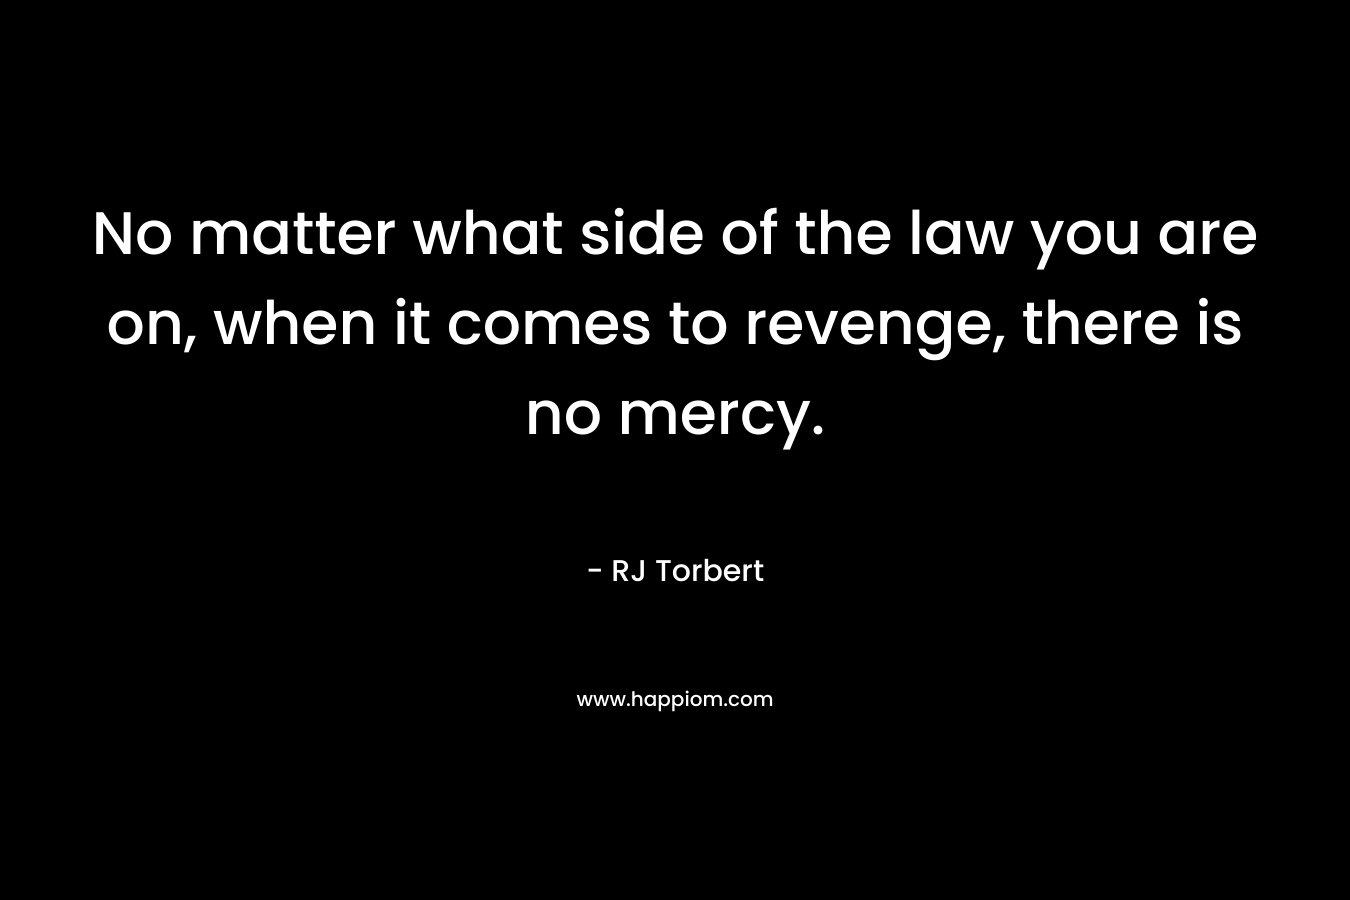 No matter what side of the law you are on, when it comes to revenge, there is no mercy. – RJ Torbert